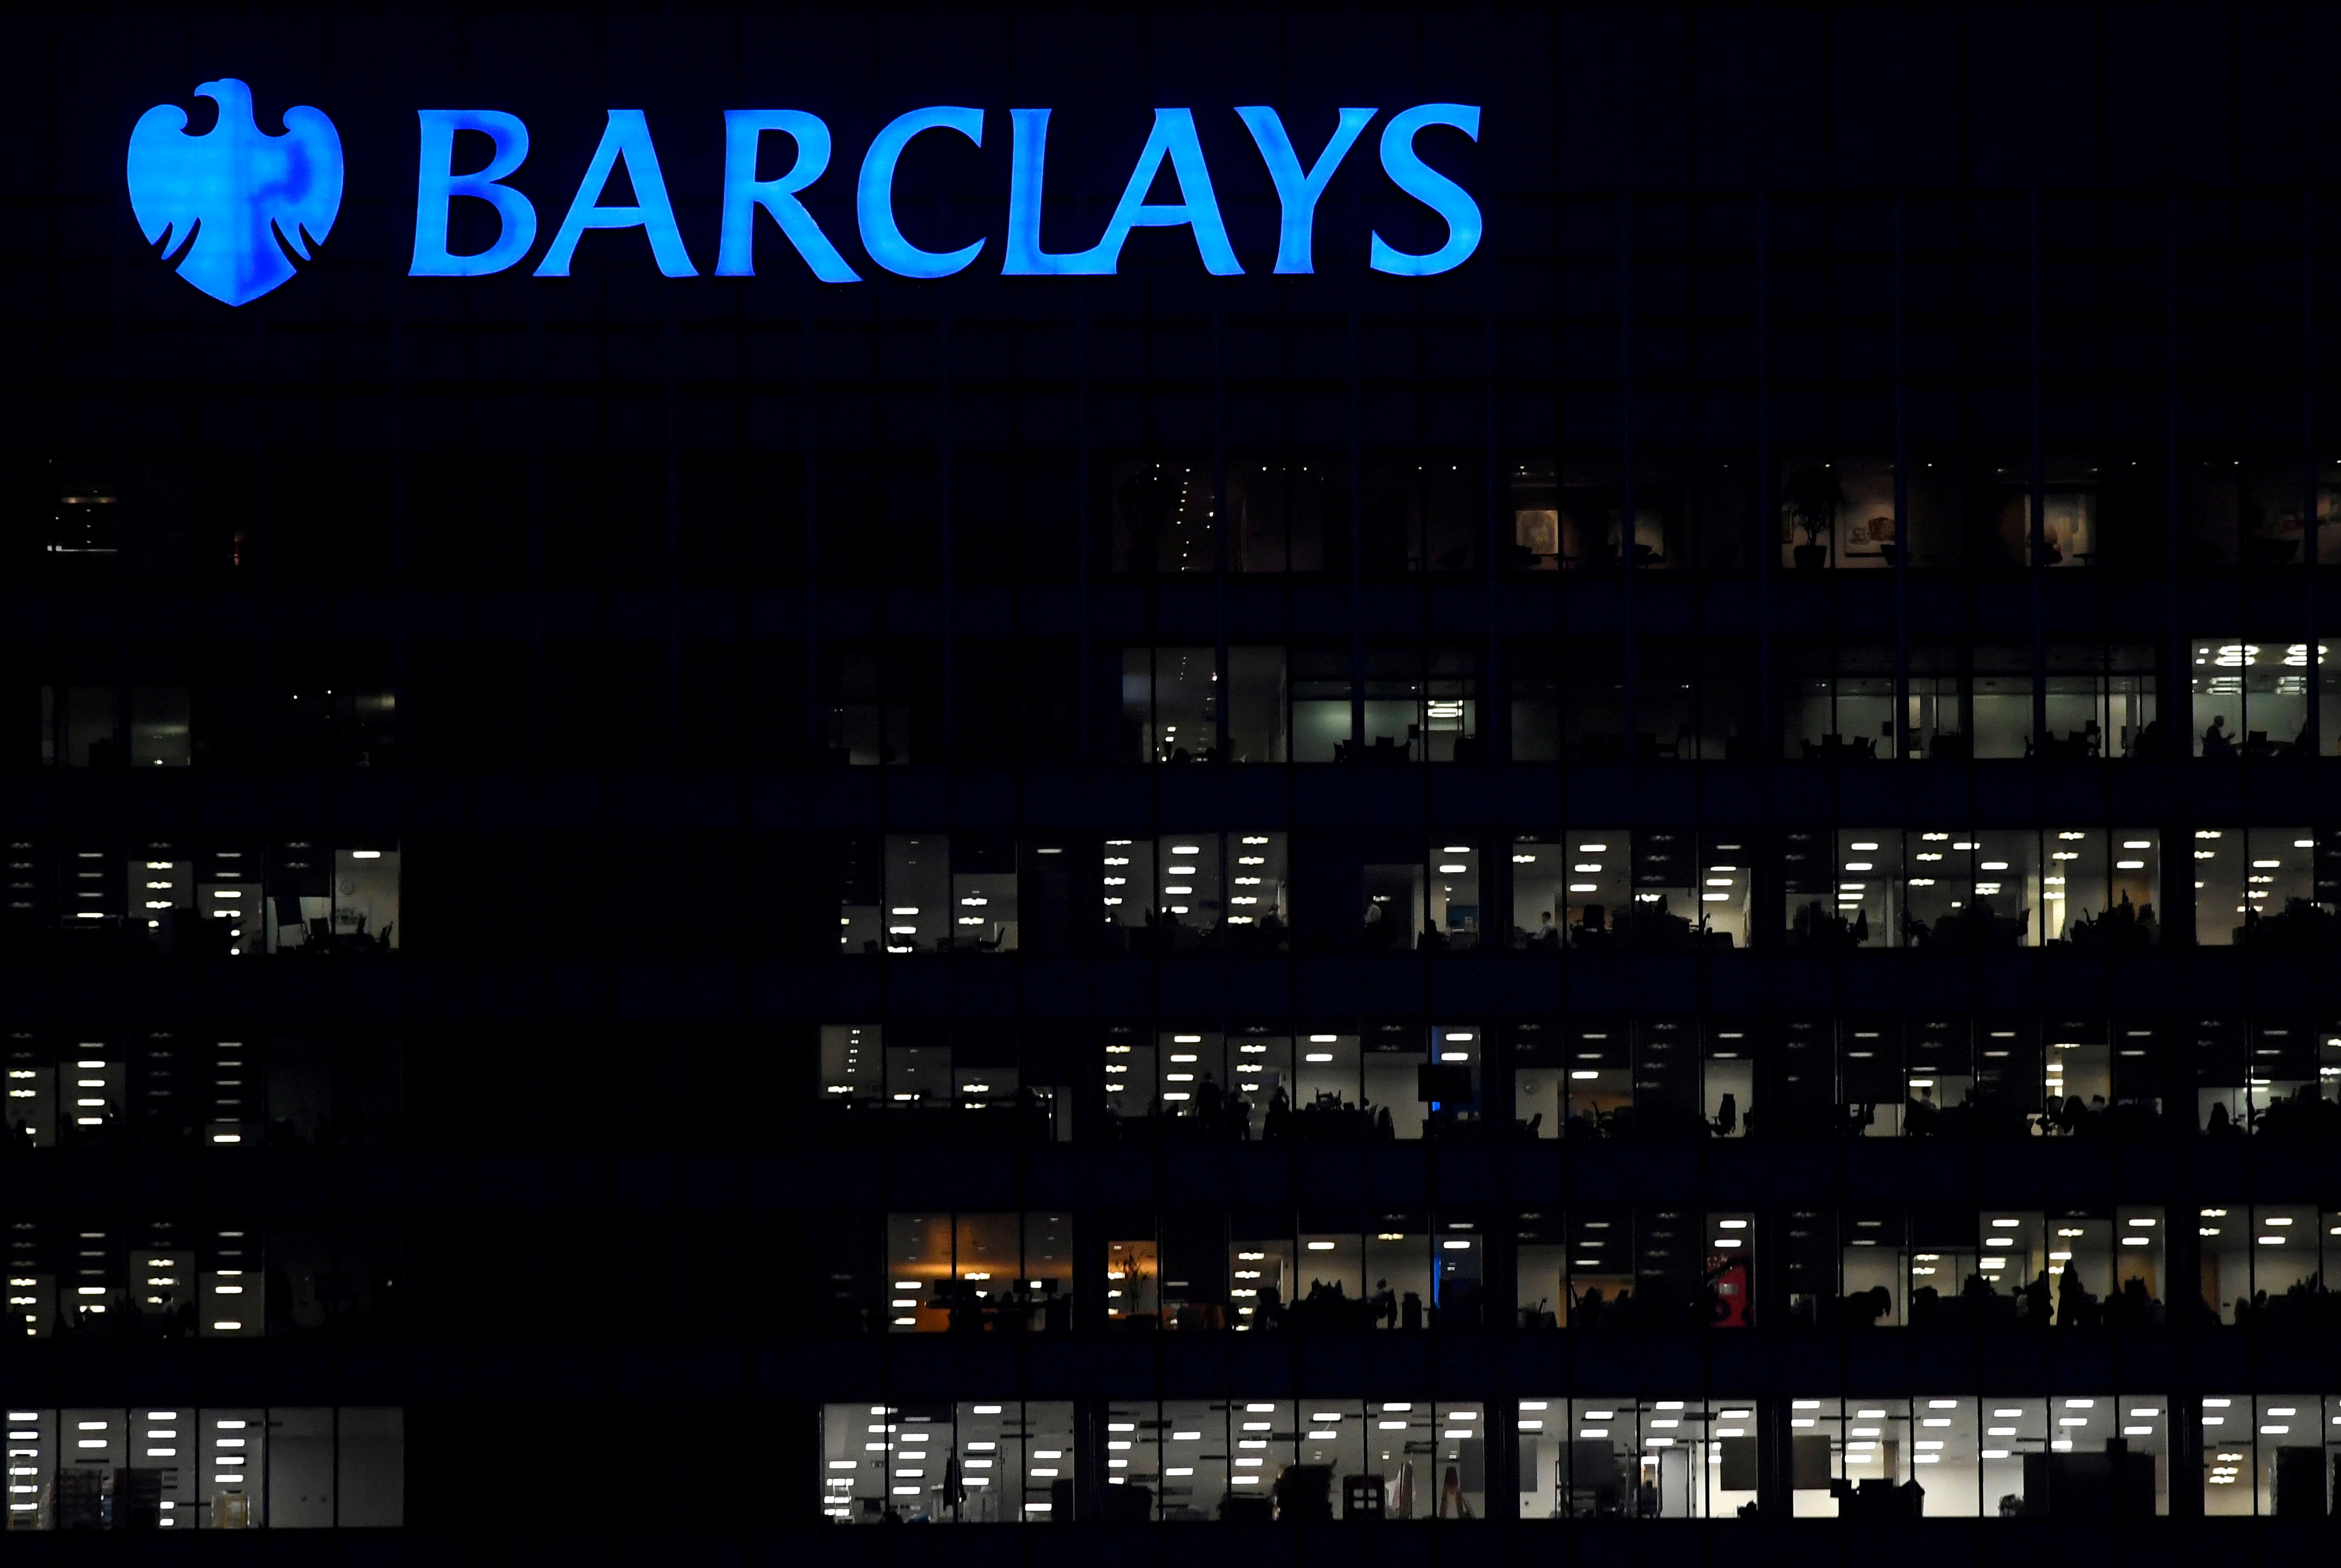 Workers are seen at Barclays bank offices in the Canary Wharf financial district in London, Britain, November 17, 2017.  REUTERS/Toby Melville/File Photo